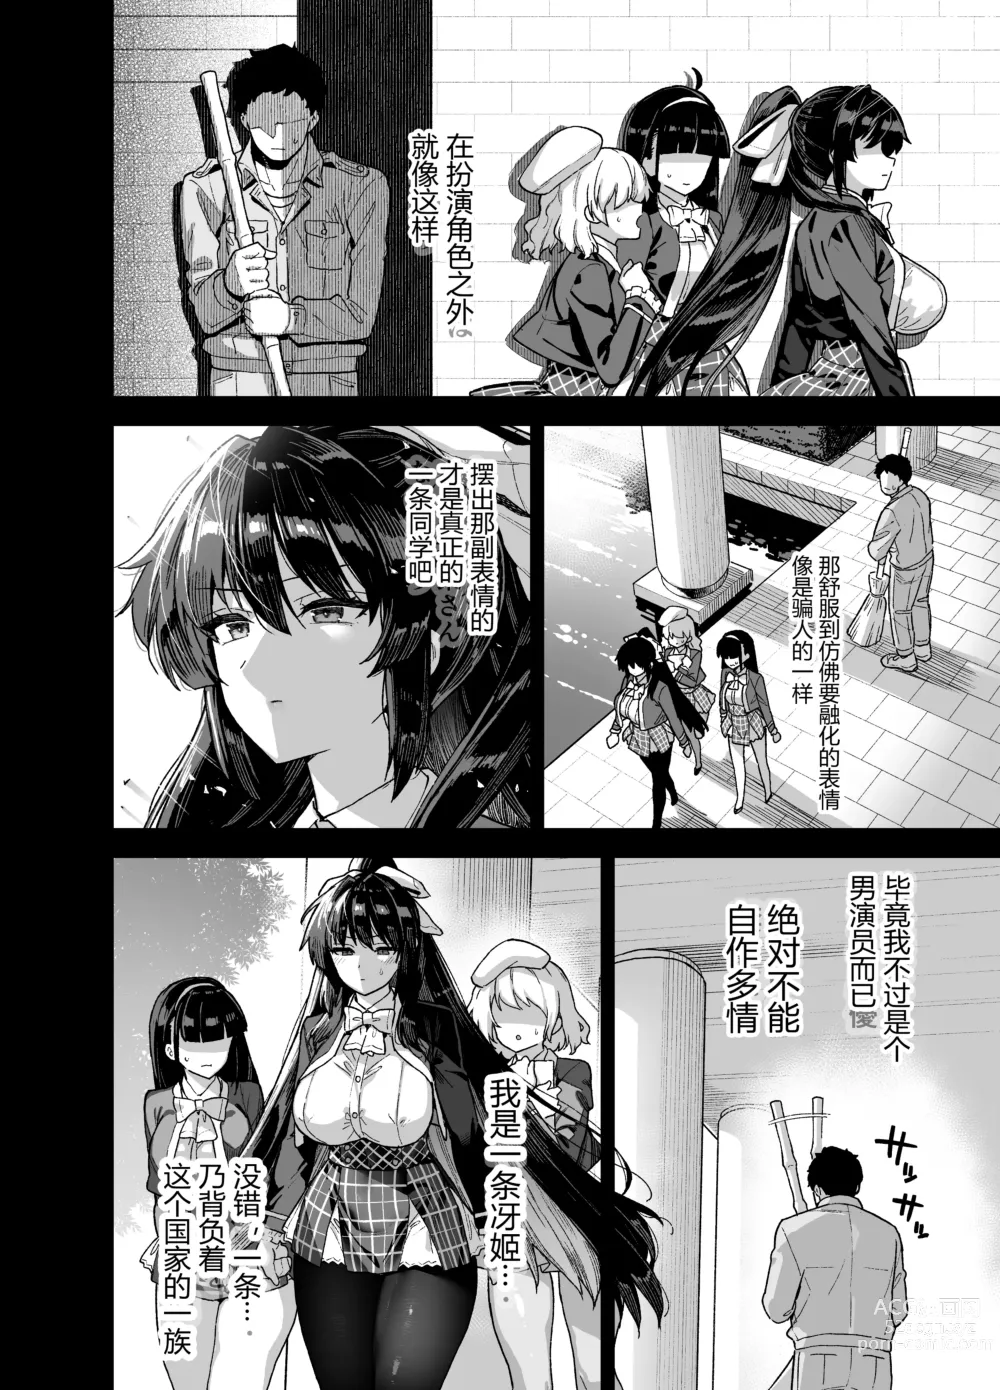 Page 21 of doujinshi 桜春女学院の男優 1-2